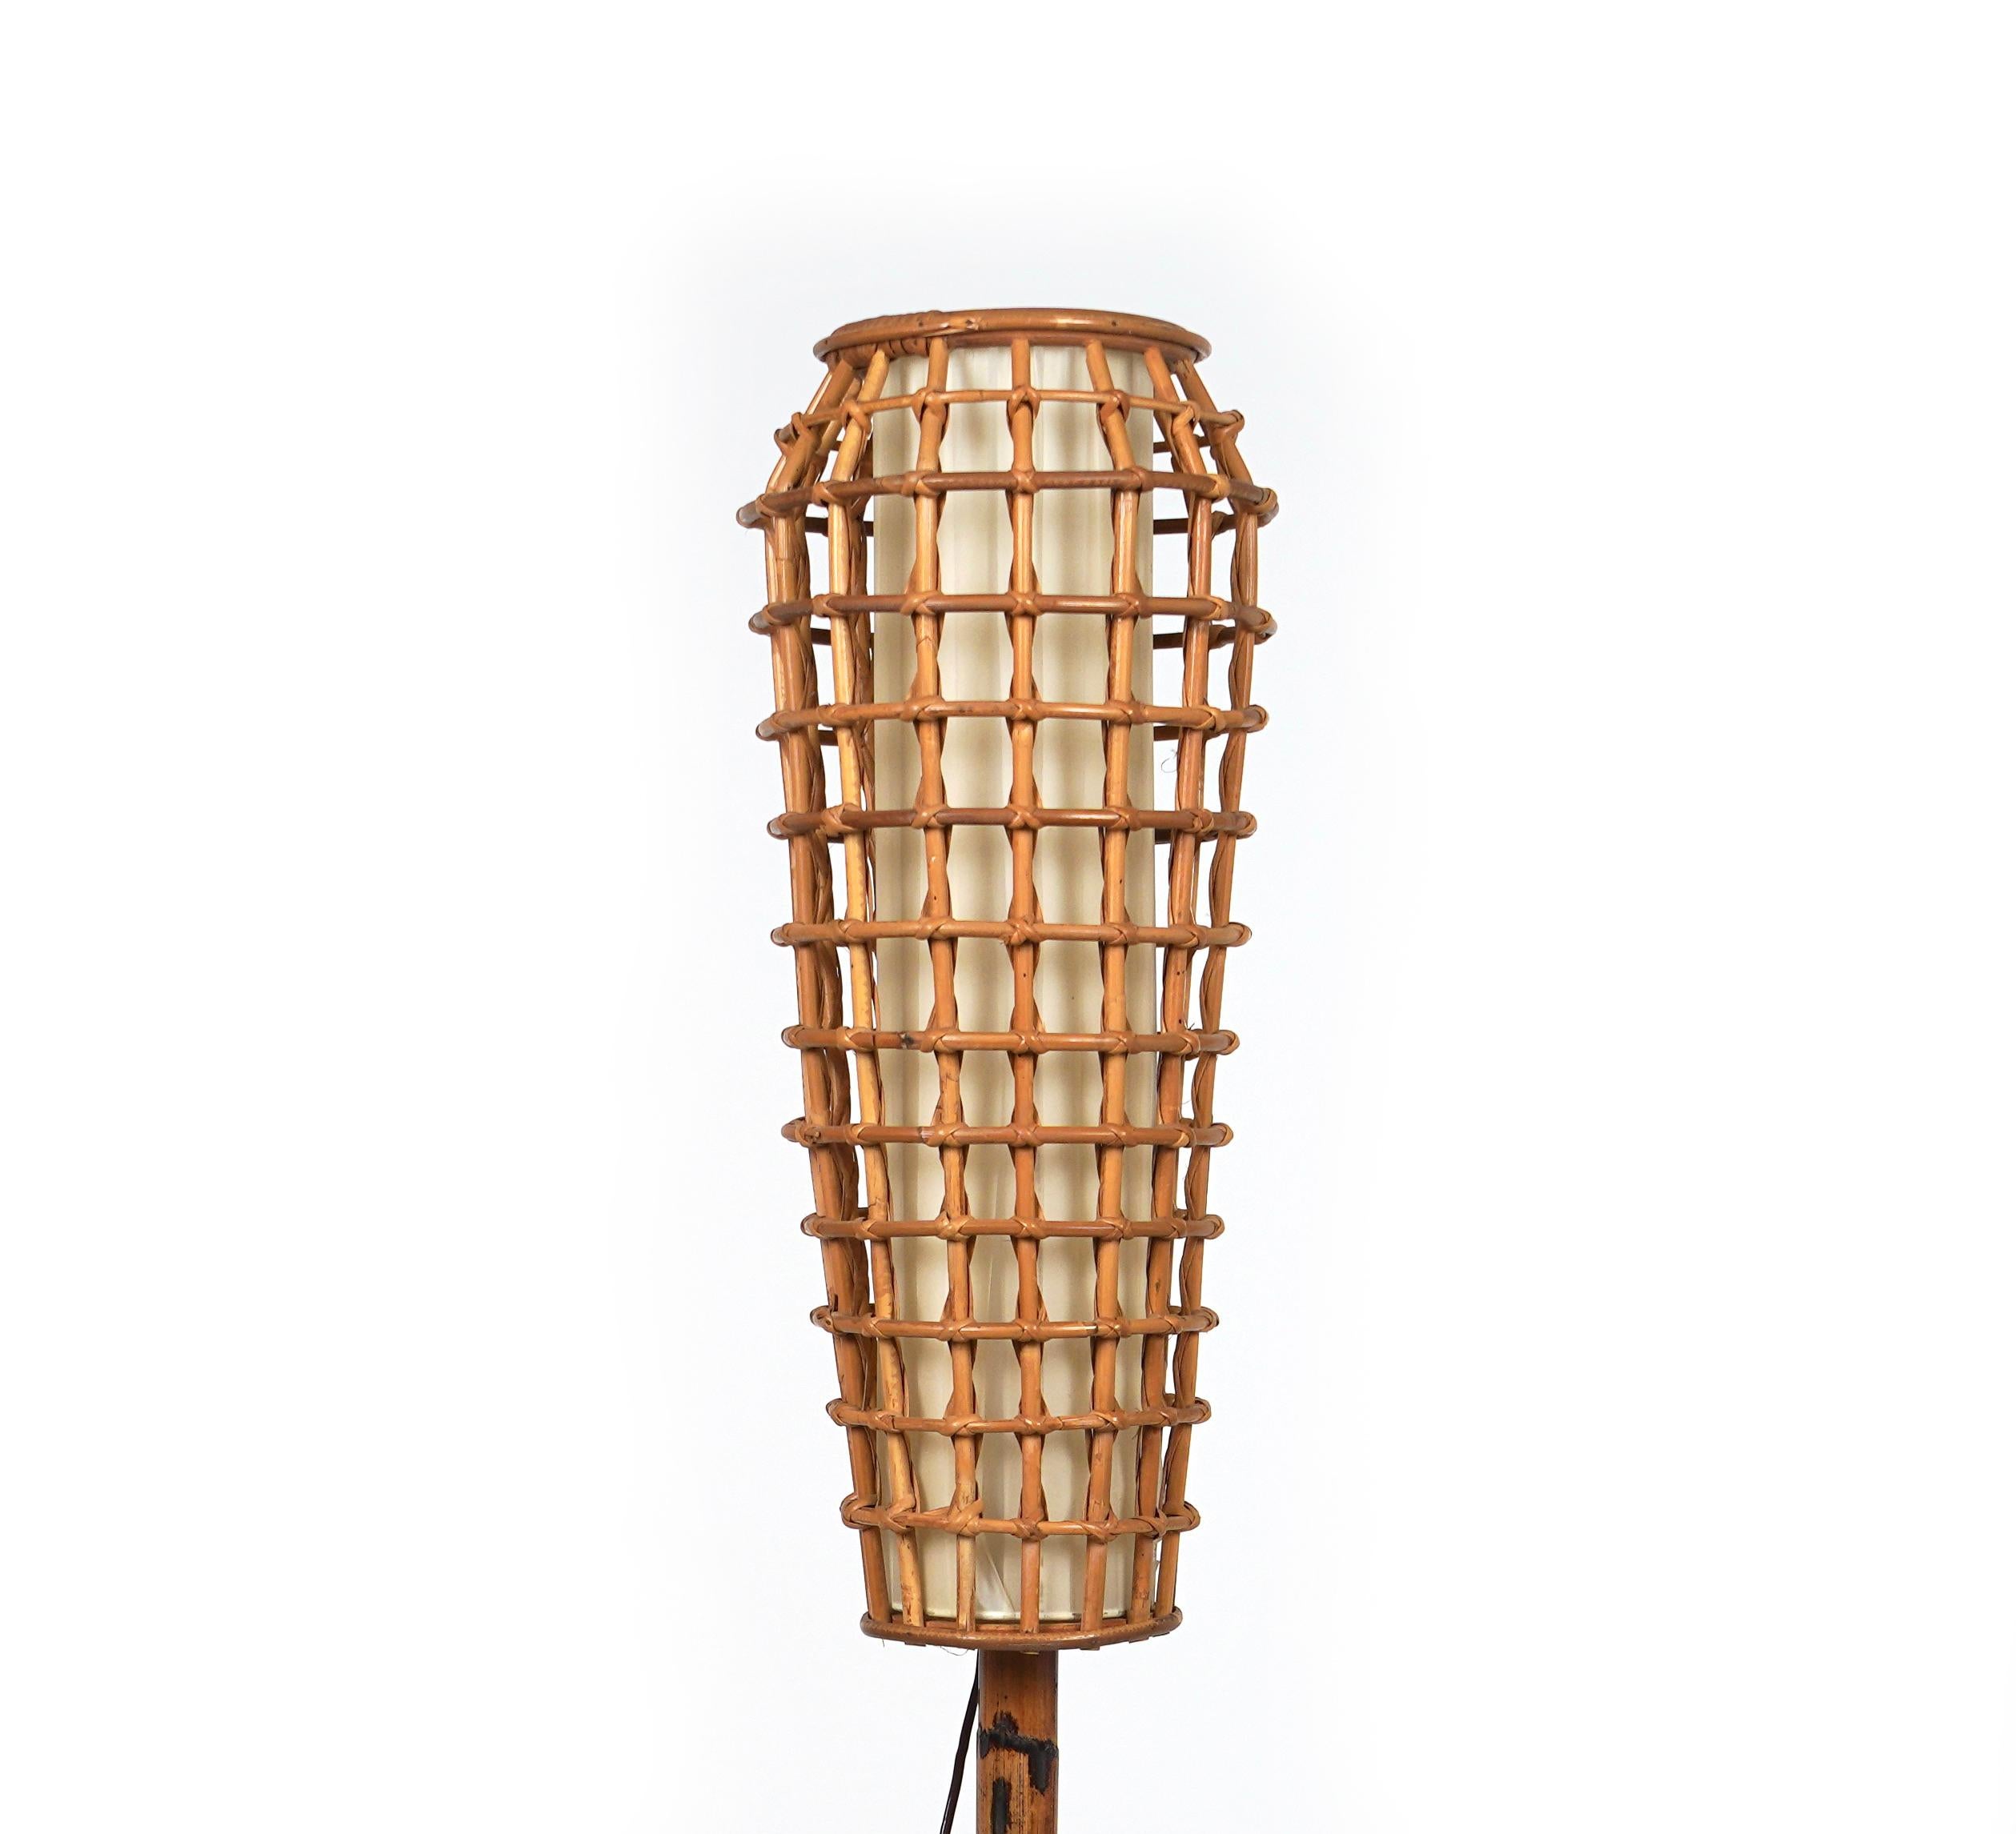 Italian Midcentury Rattan and Bamboo Floor Lamp Franco Albini Style, Italy, 1960s For Sale